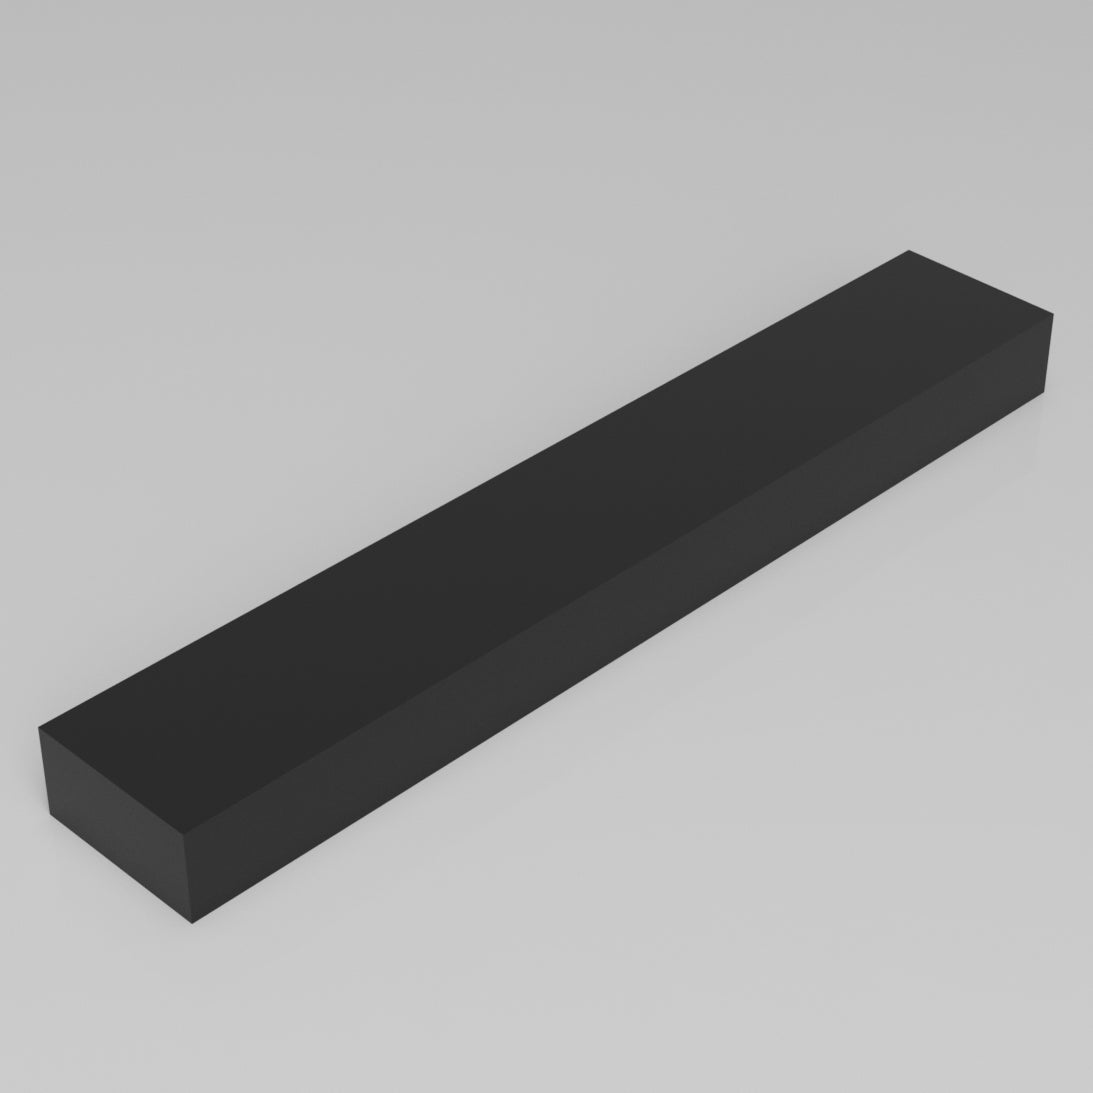 Machinable Wax Rectangular Block Front View 2 Inch by 4 Inch by 24 Inch